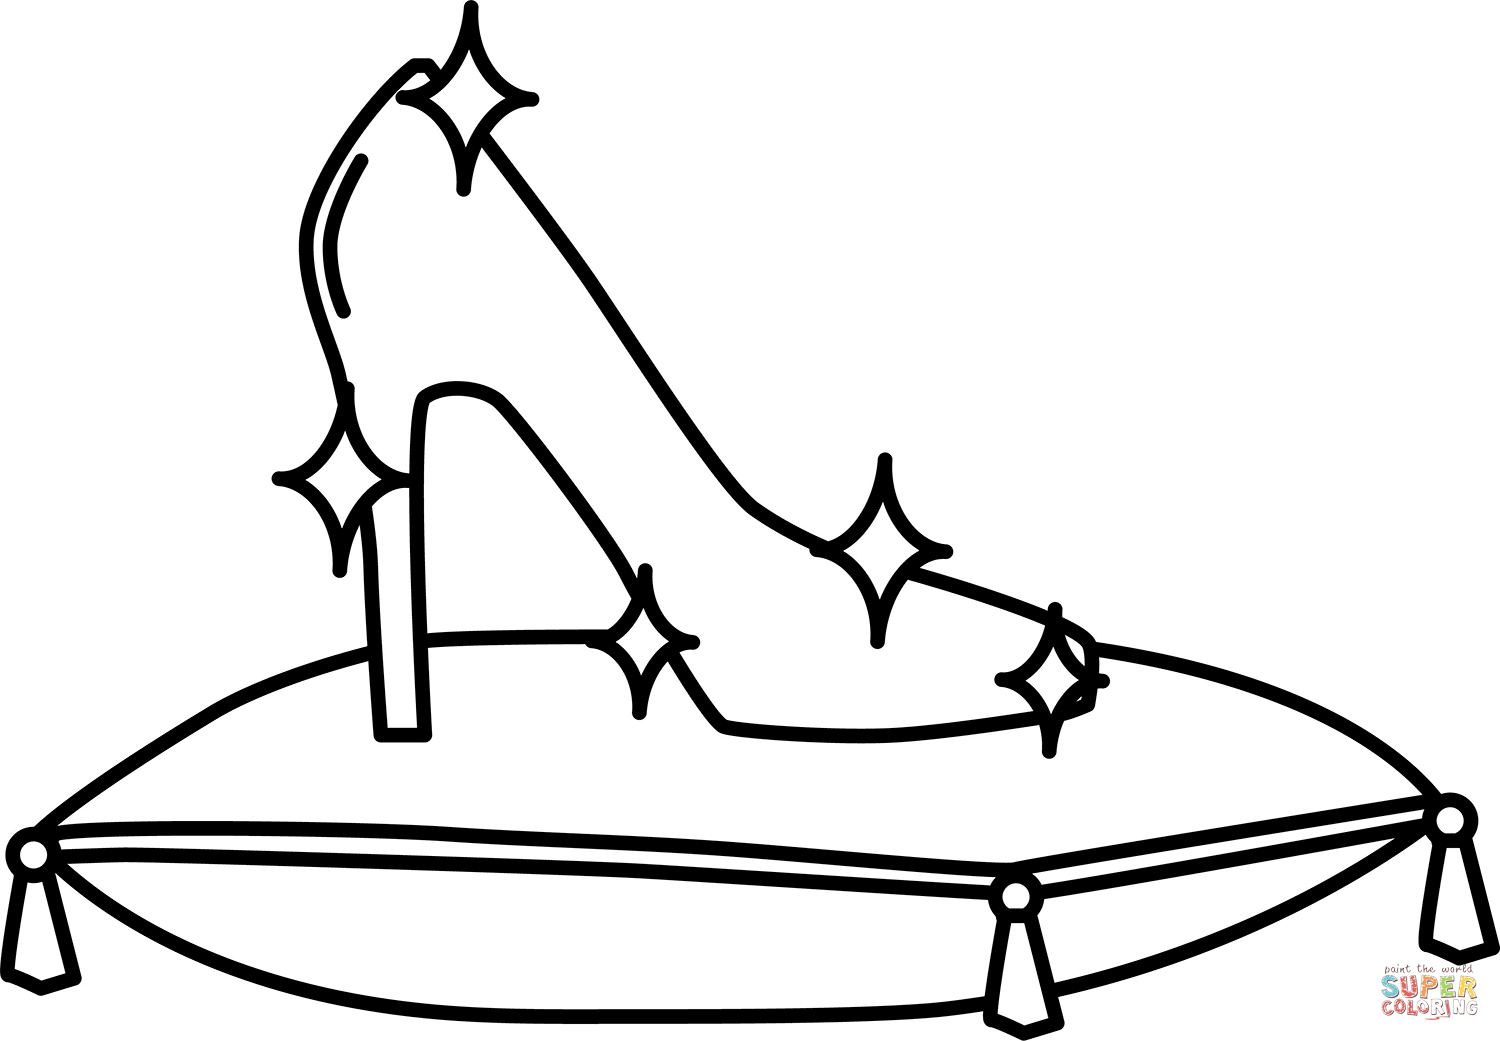 Cinderella shoe coloring page free printable coloring pages